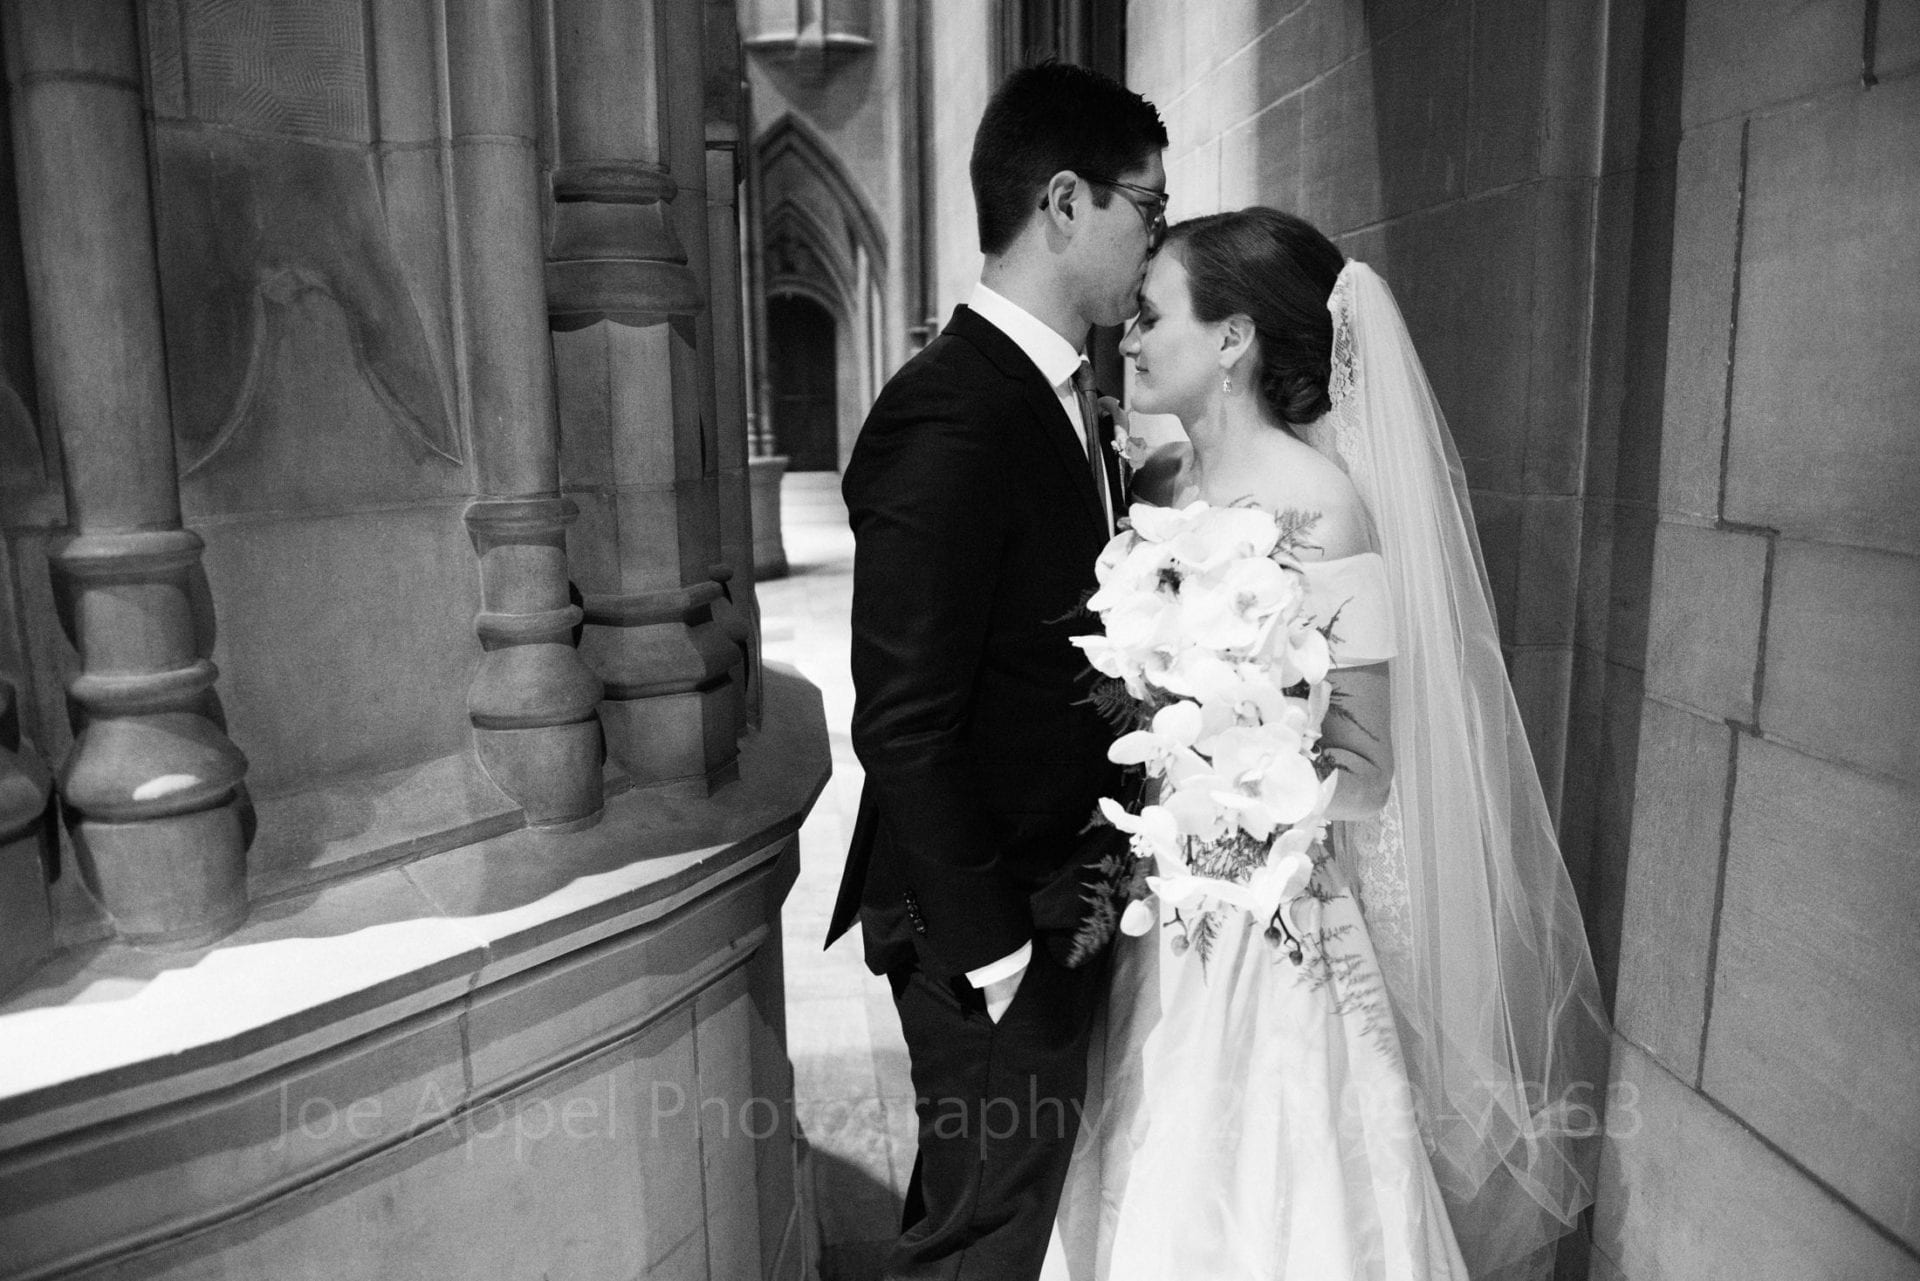 A groom kisses his bride on the forehead while they stand behind a stone column at the side of the church during their Heinz Chapel Wedding.